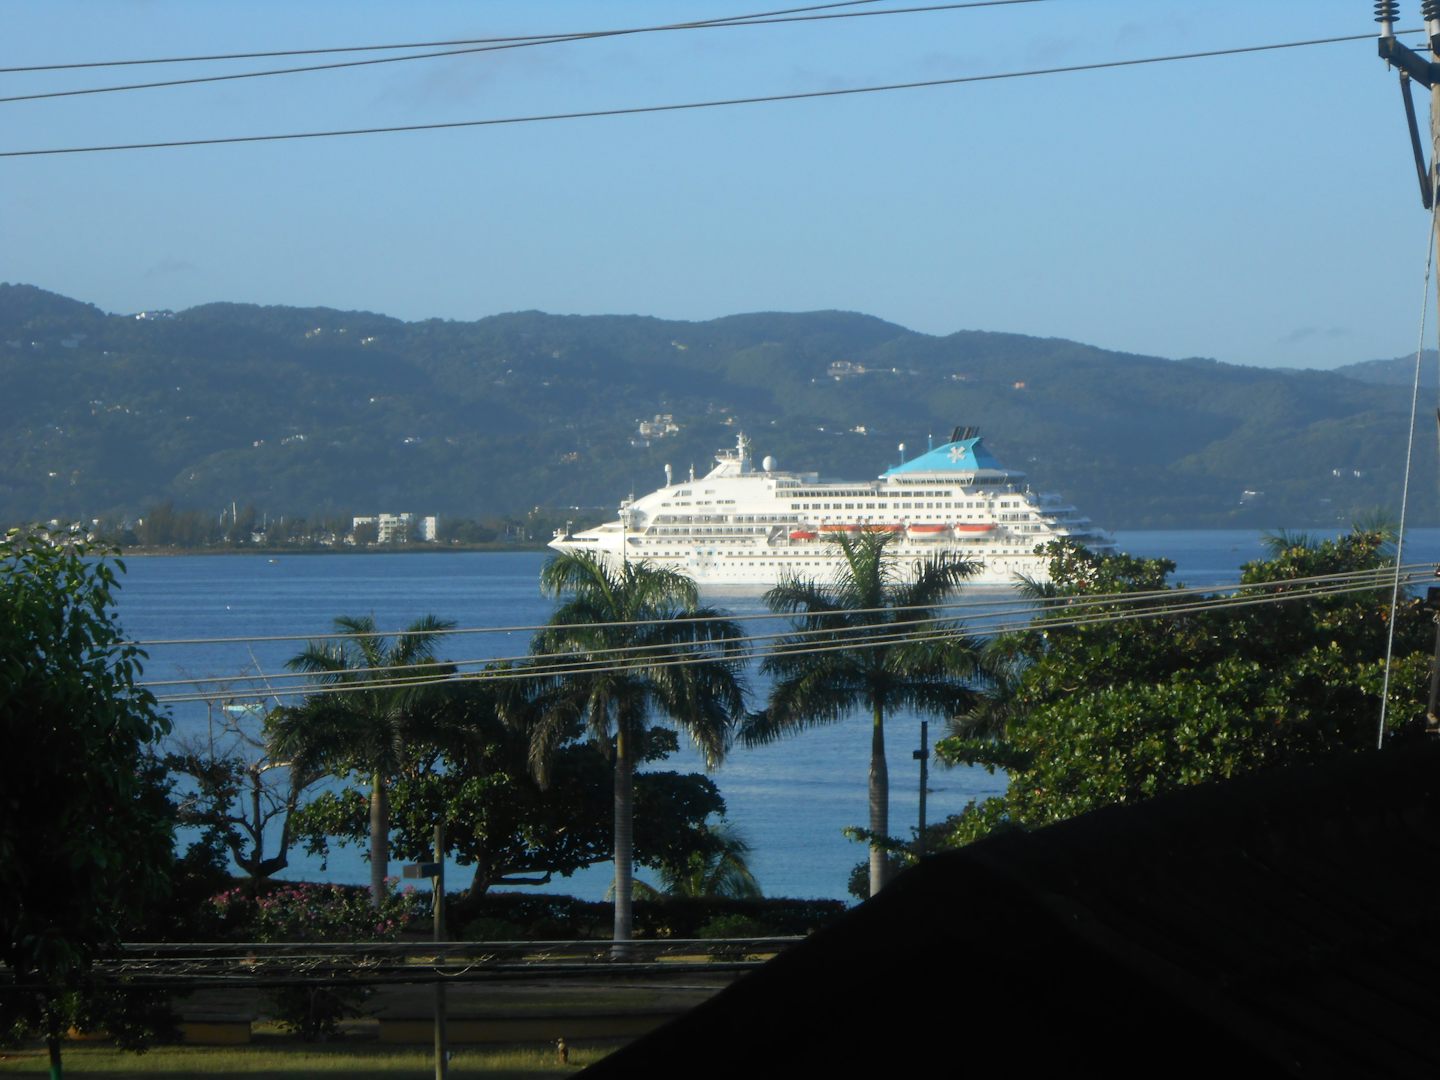 Celeystal Crystal coming into port in Montego Bay ...start of our cruise !